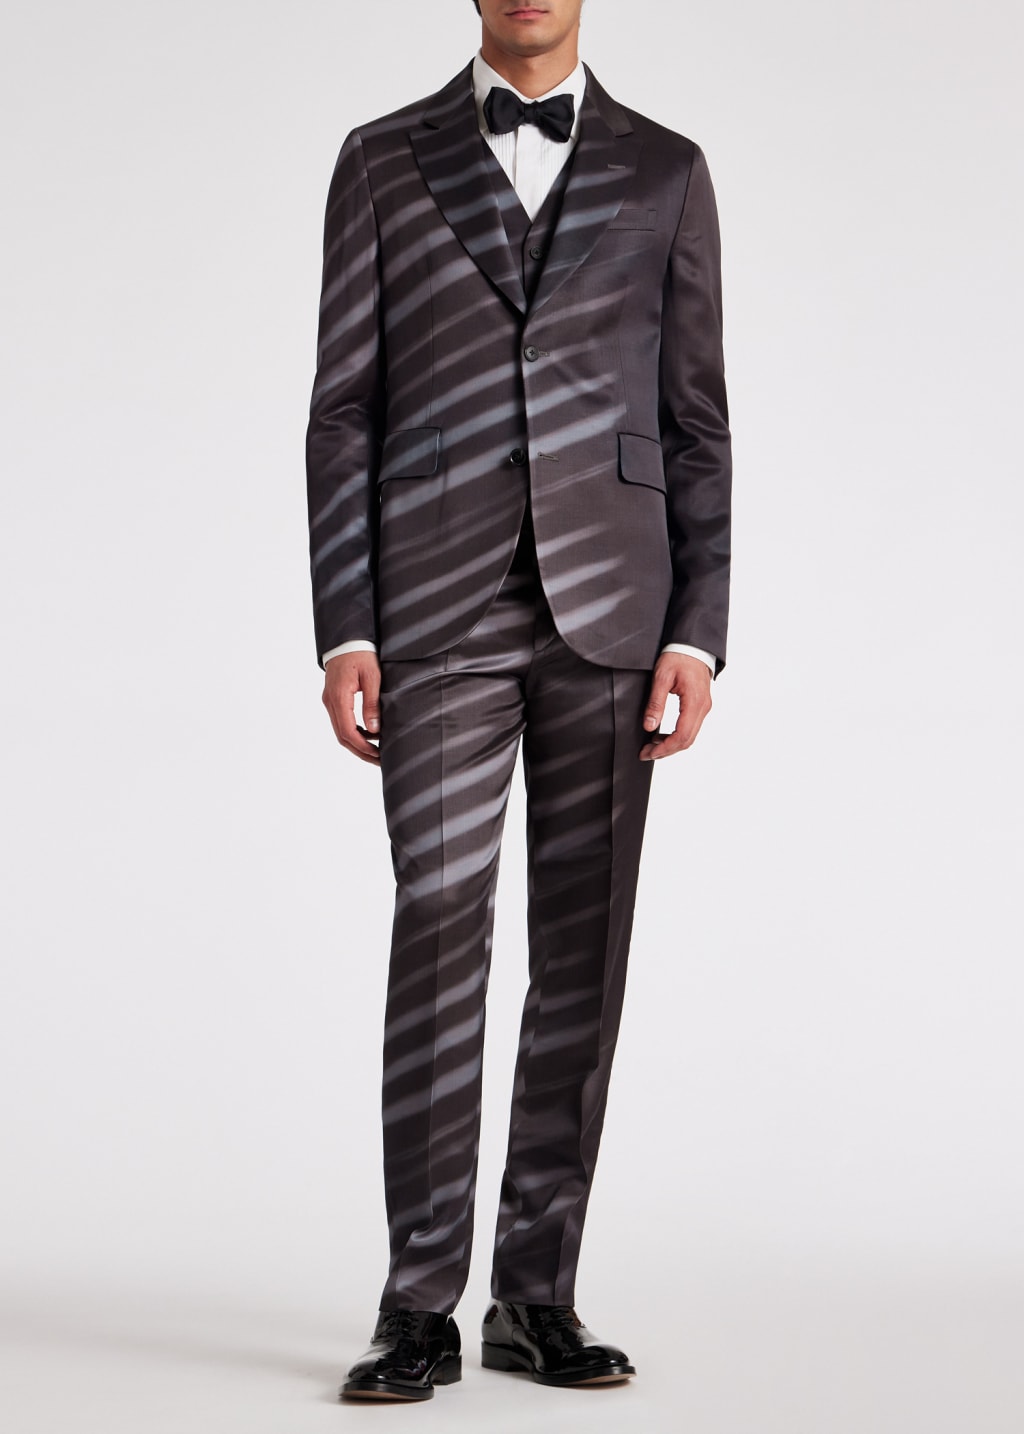 Model View - Tailored-Fit 'Morning Light' Viscose-Wool Suit by Paul Smith